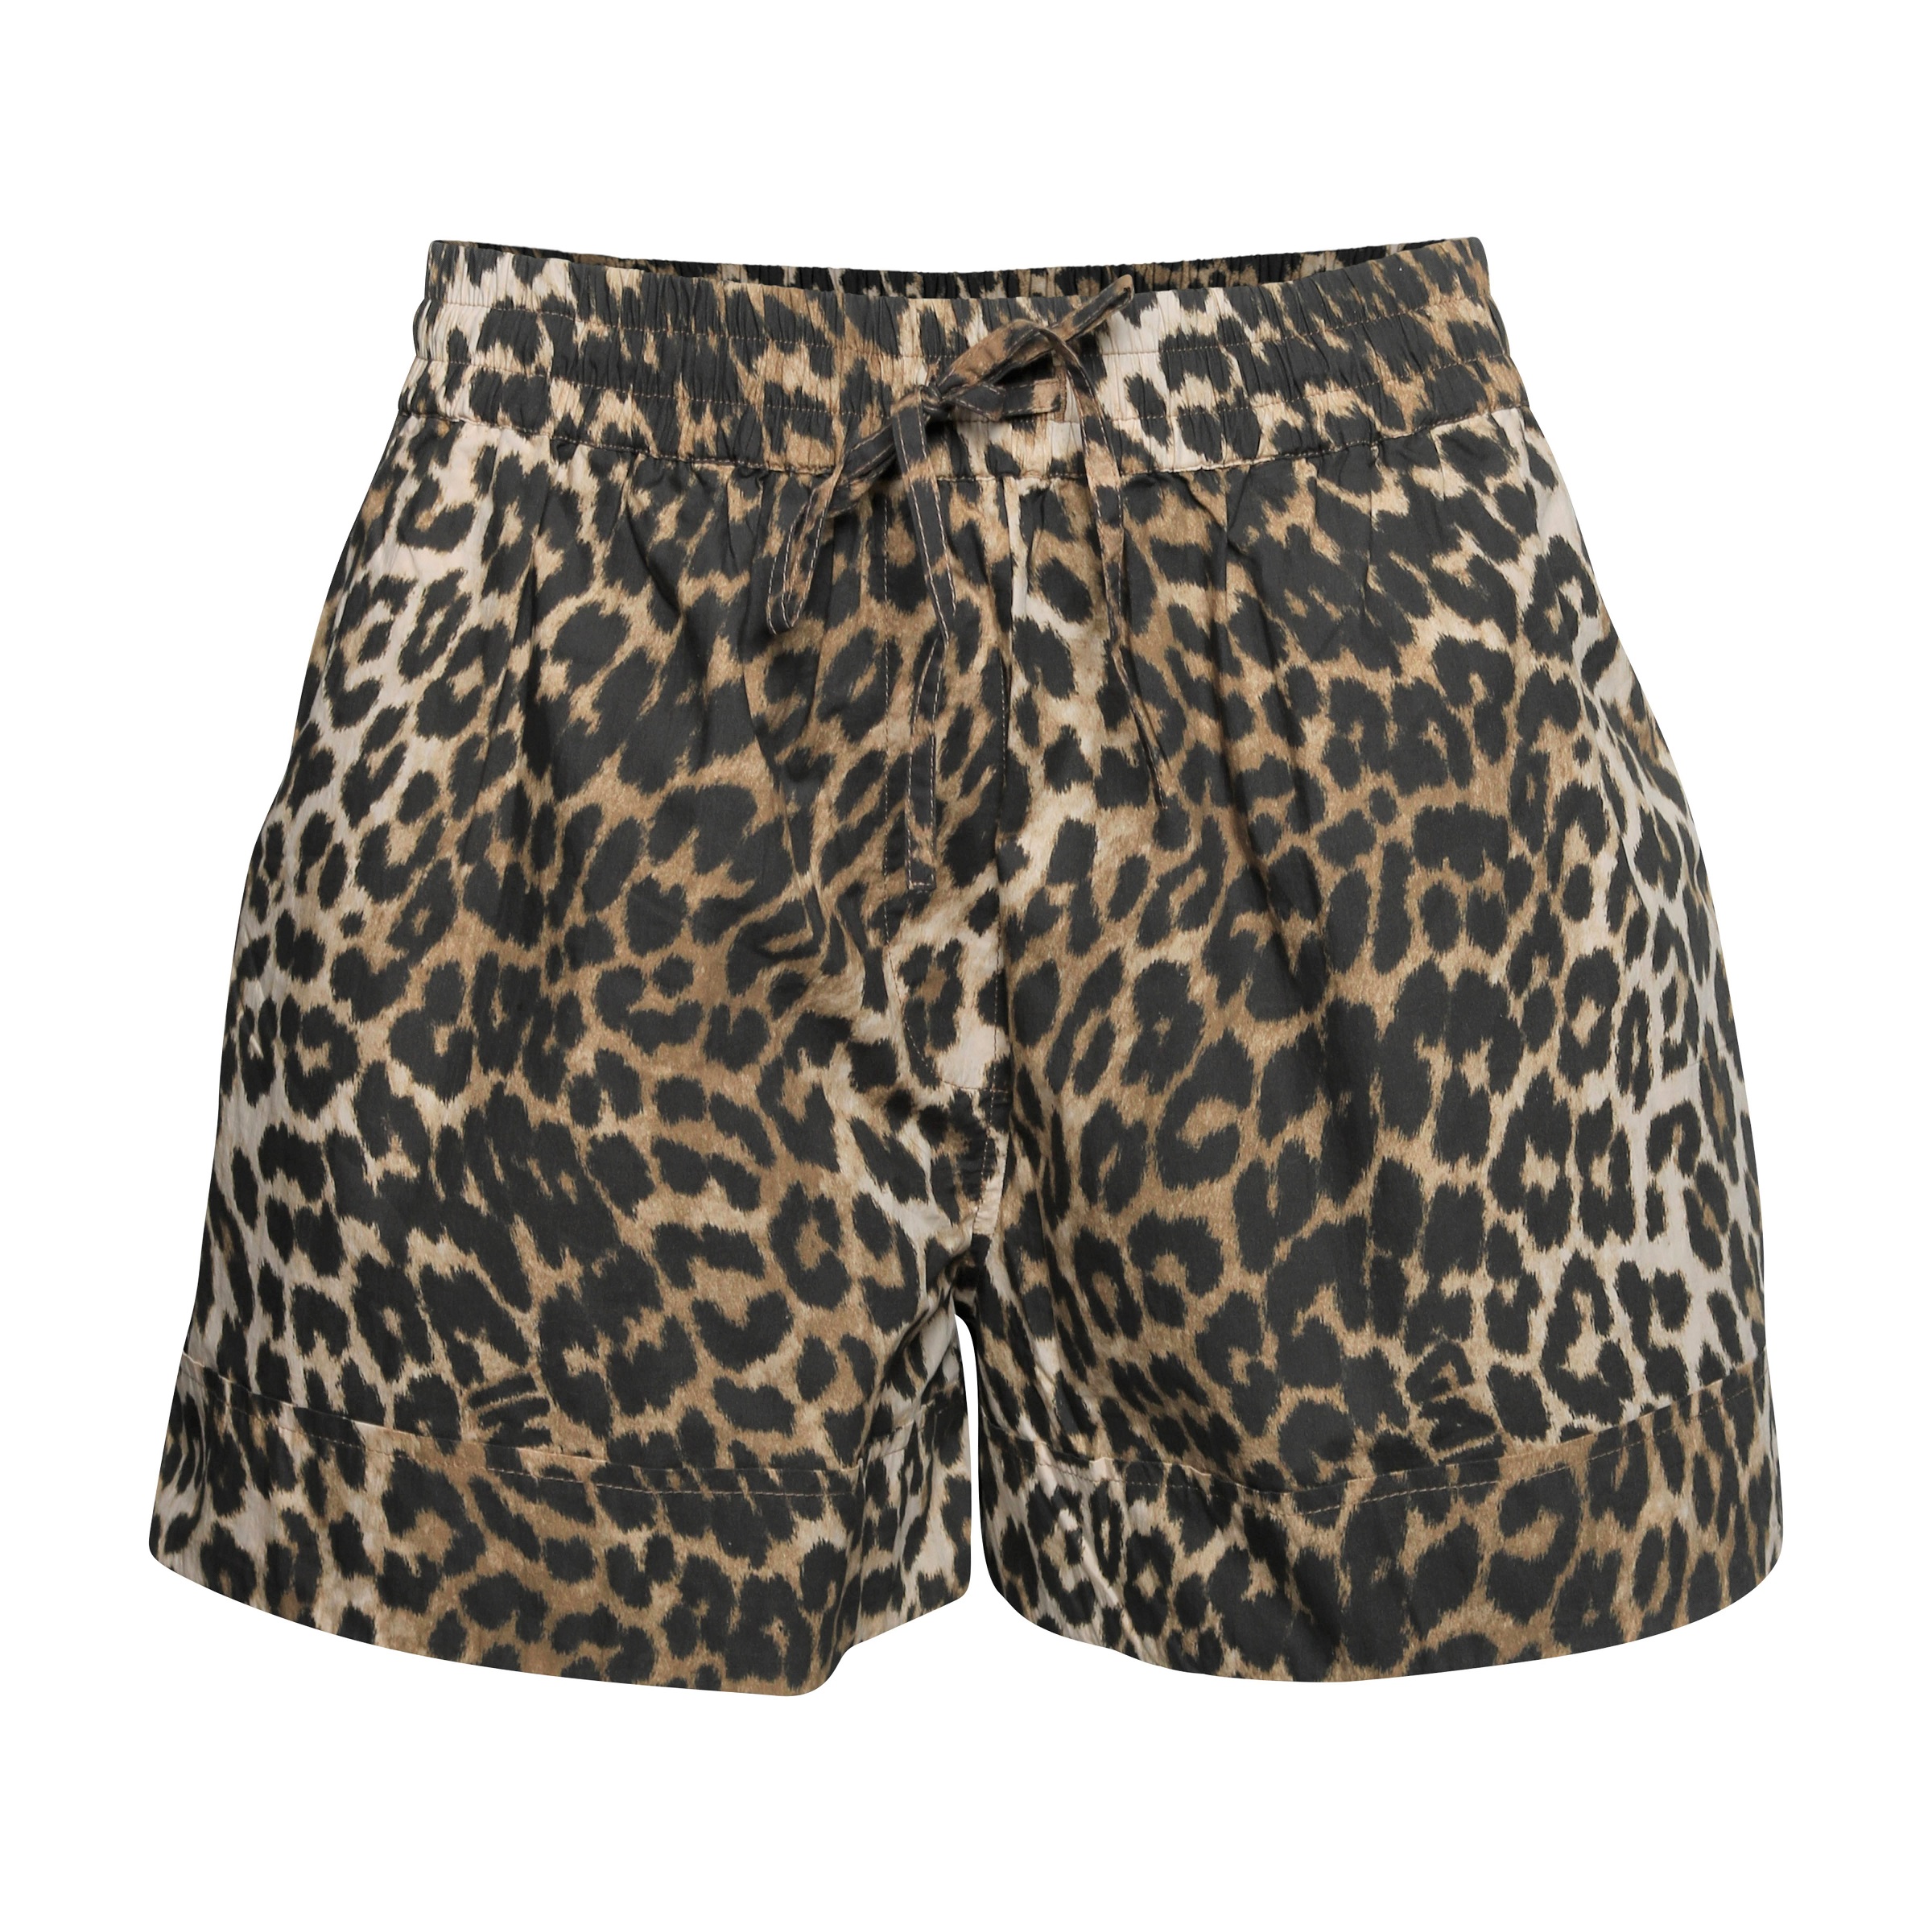 GANNI Printed Cotton Elasticated Shorts in Leopard 38